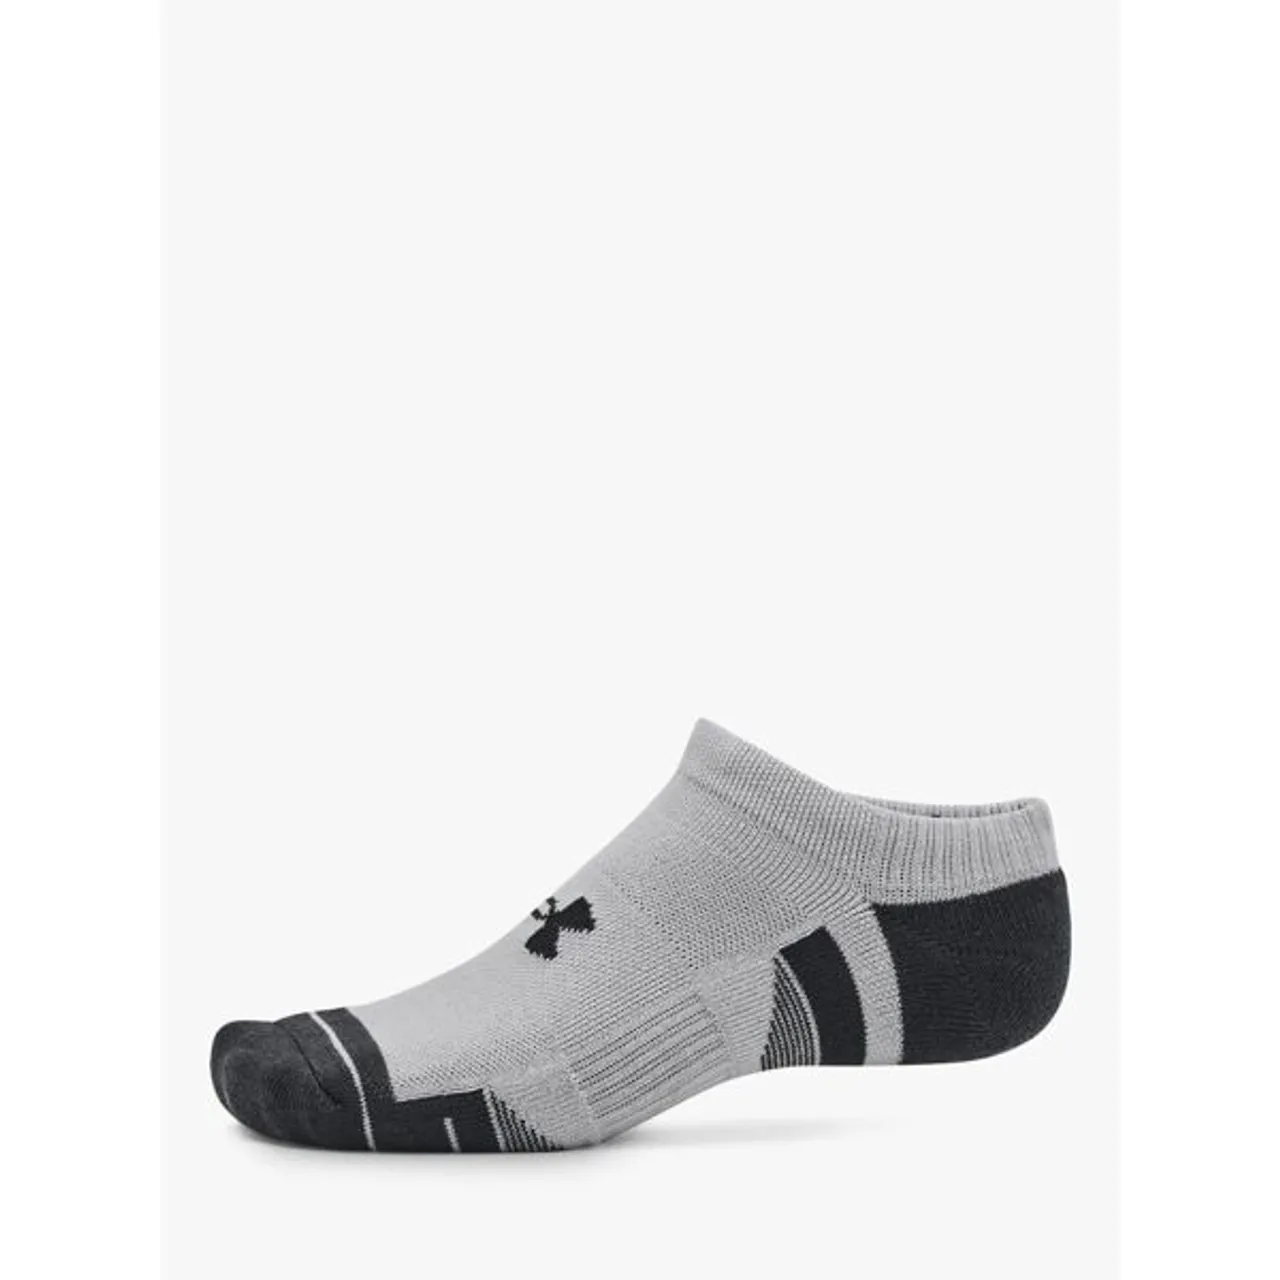 Under Armour Performance Tech Socks, Pack of 3 - Mod Gray/White/Jet Gray - Male